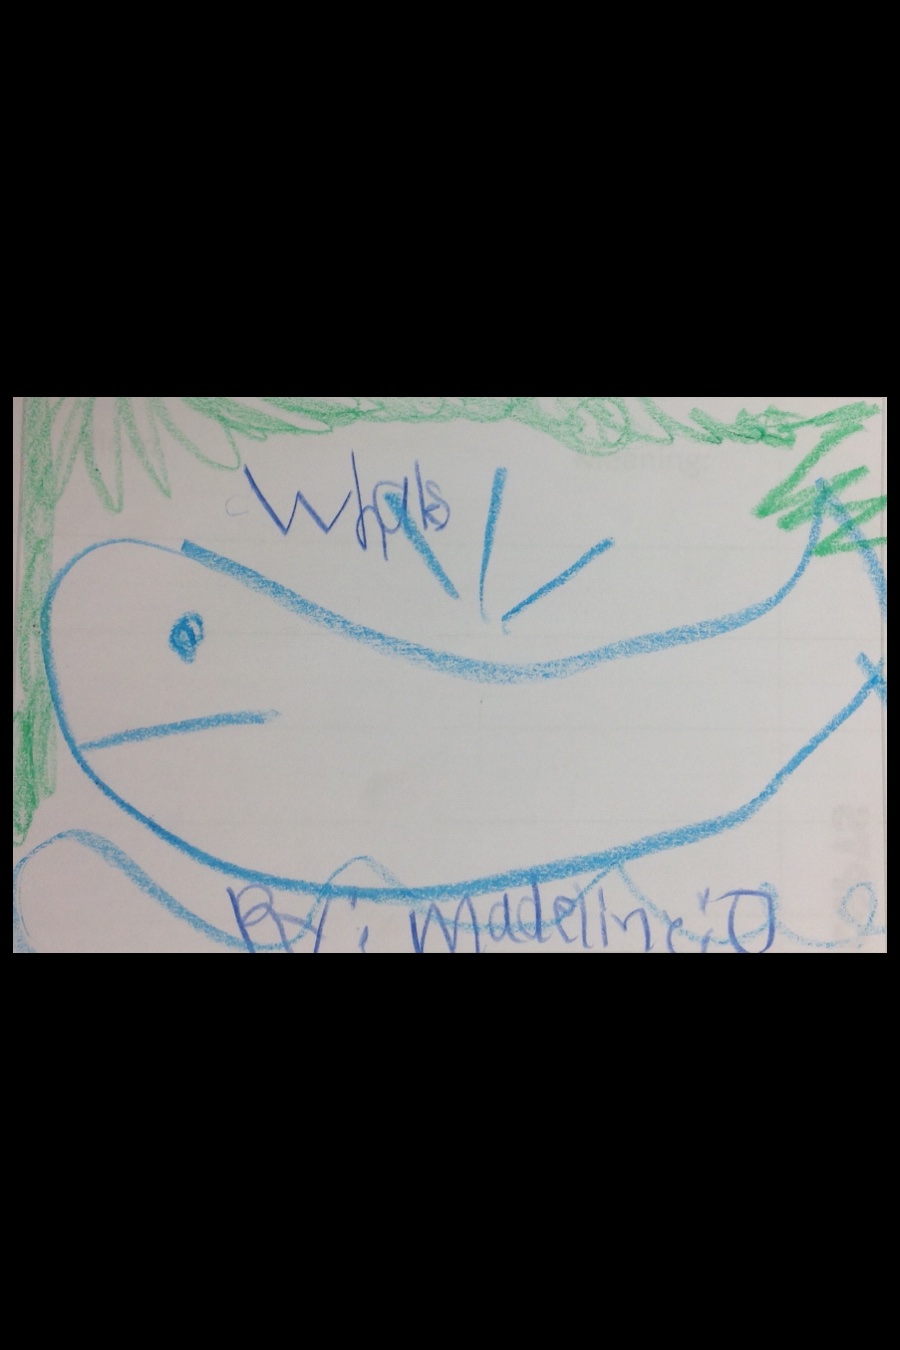 Whales by Madeline O